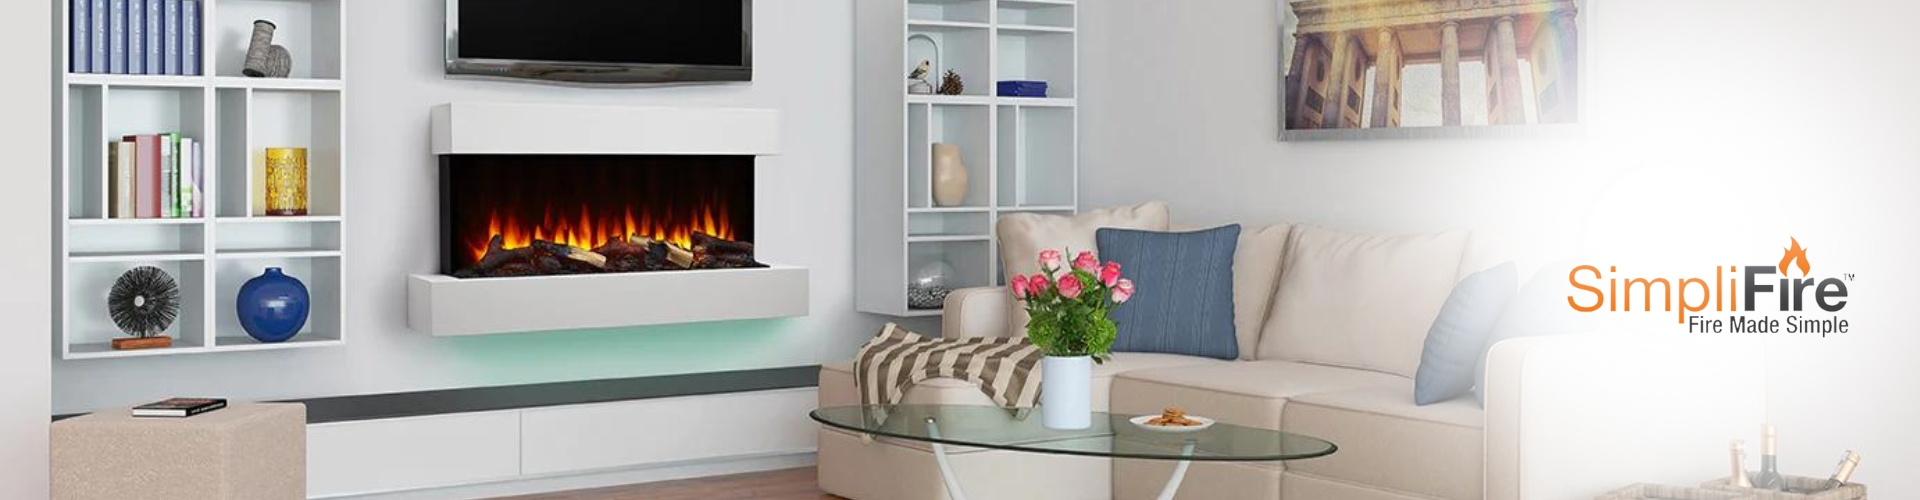 Simple Fire Electric Fireplace